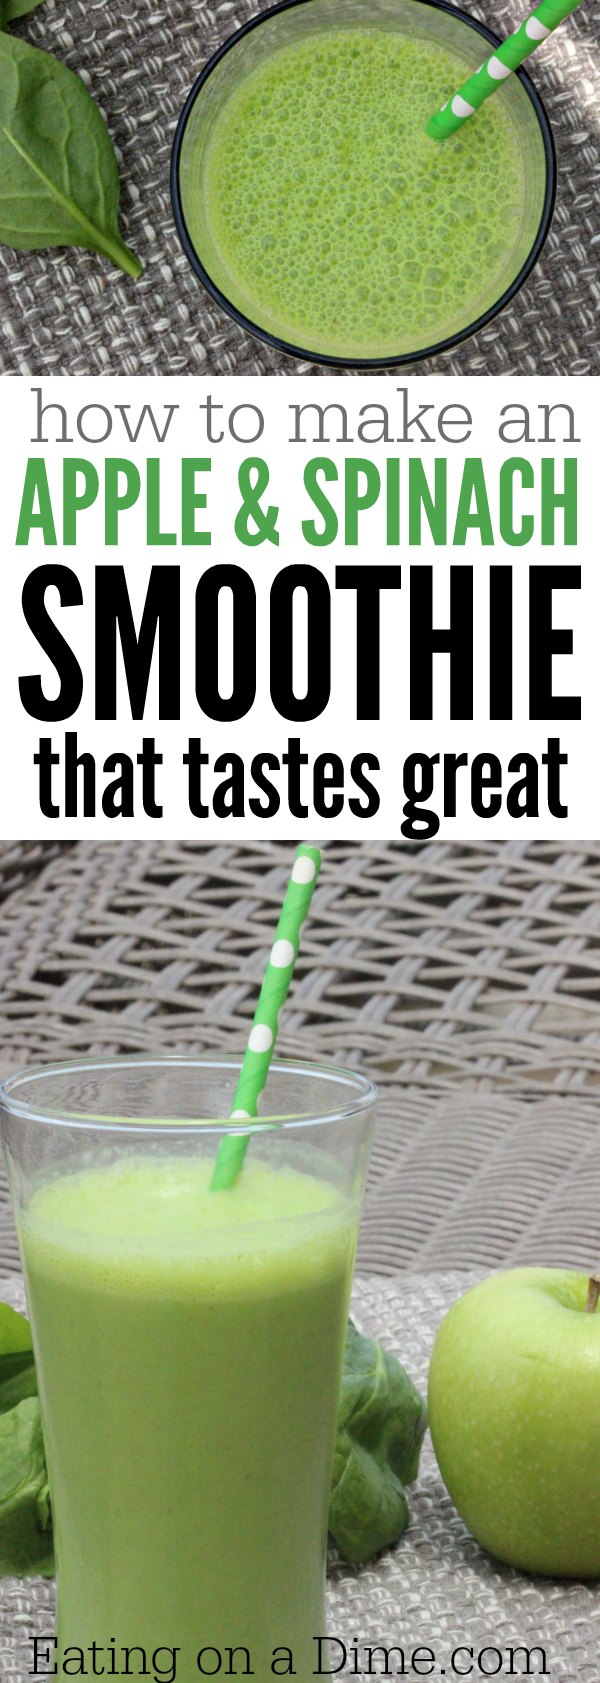 You'll love this easy and healthy green smoothie recipe. This Apple Spinach Green Smoothie recipe is easy to make and packed with nutrients and flavor. This fat burning smoothie is perfect for breakfast during a detox or to help you loss weight. This is one of my favorite healthy green smoothie recipes that taste good and great for energy. I hope you try this recipe during your next cleanse and it’s great for kids too! #eatingonadime #smoothierecipes #greensmoothies